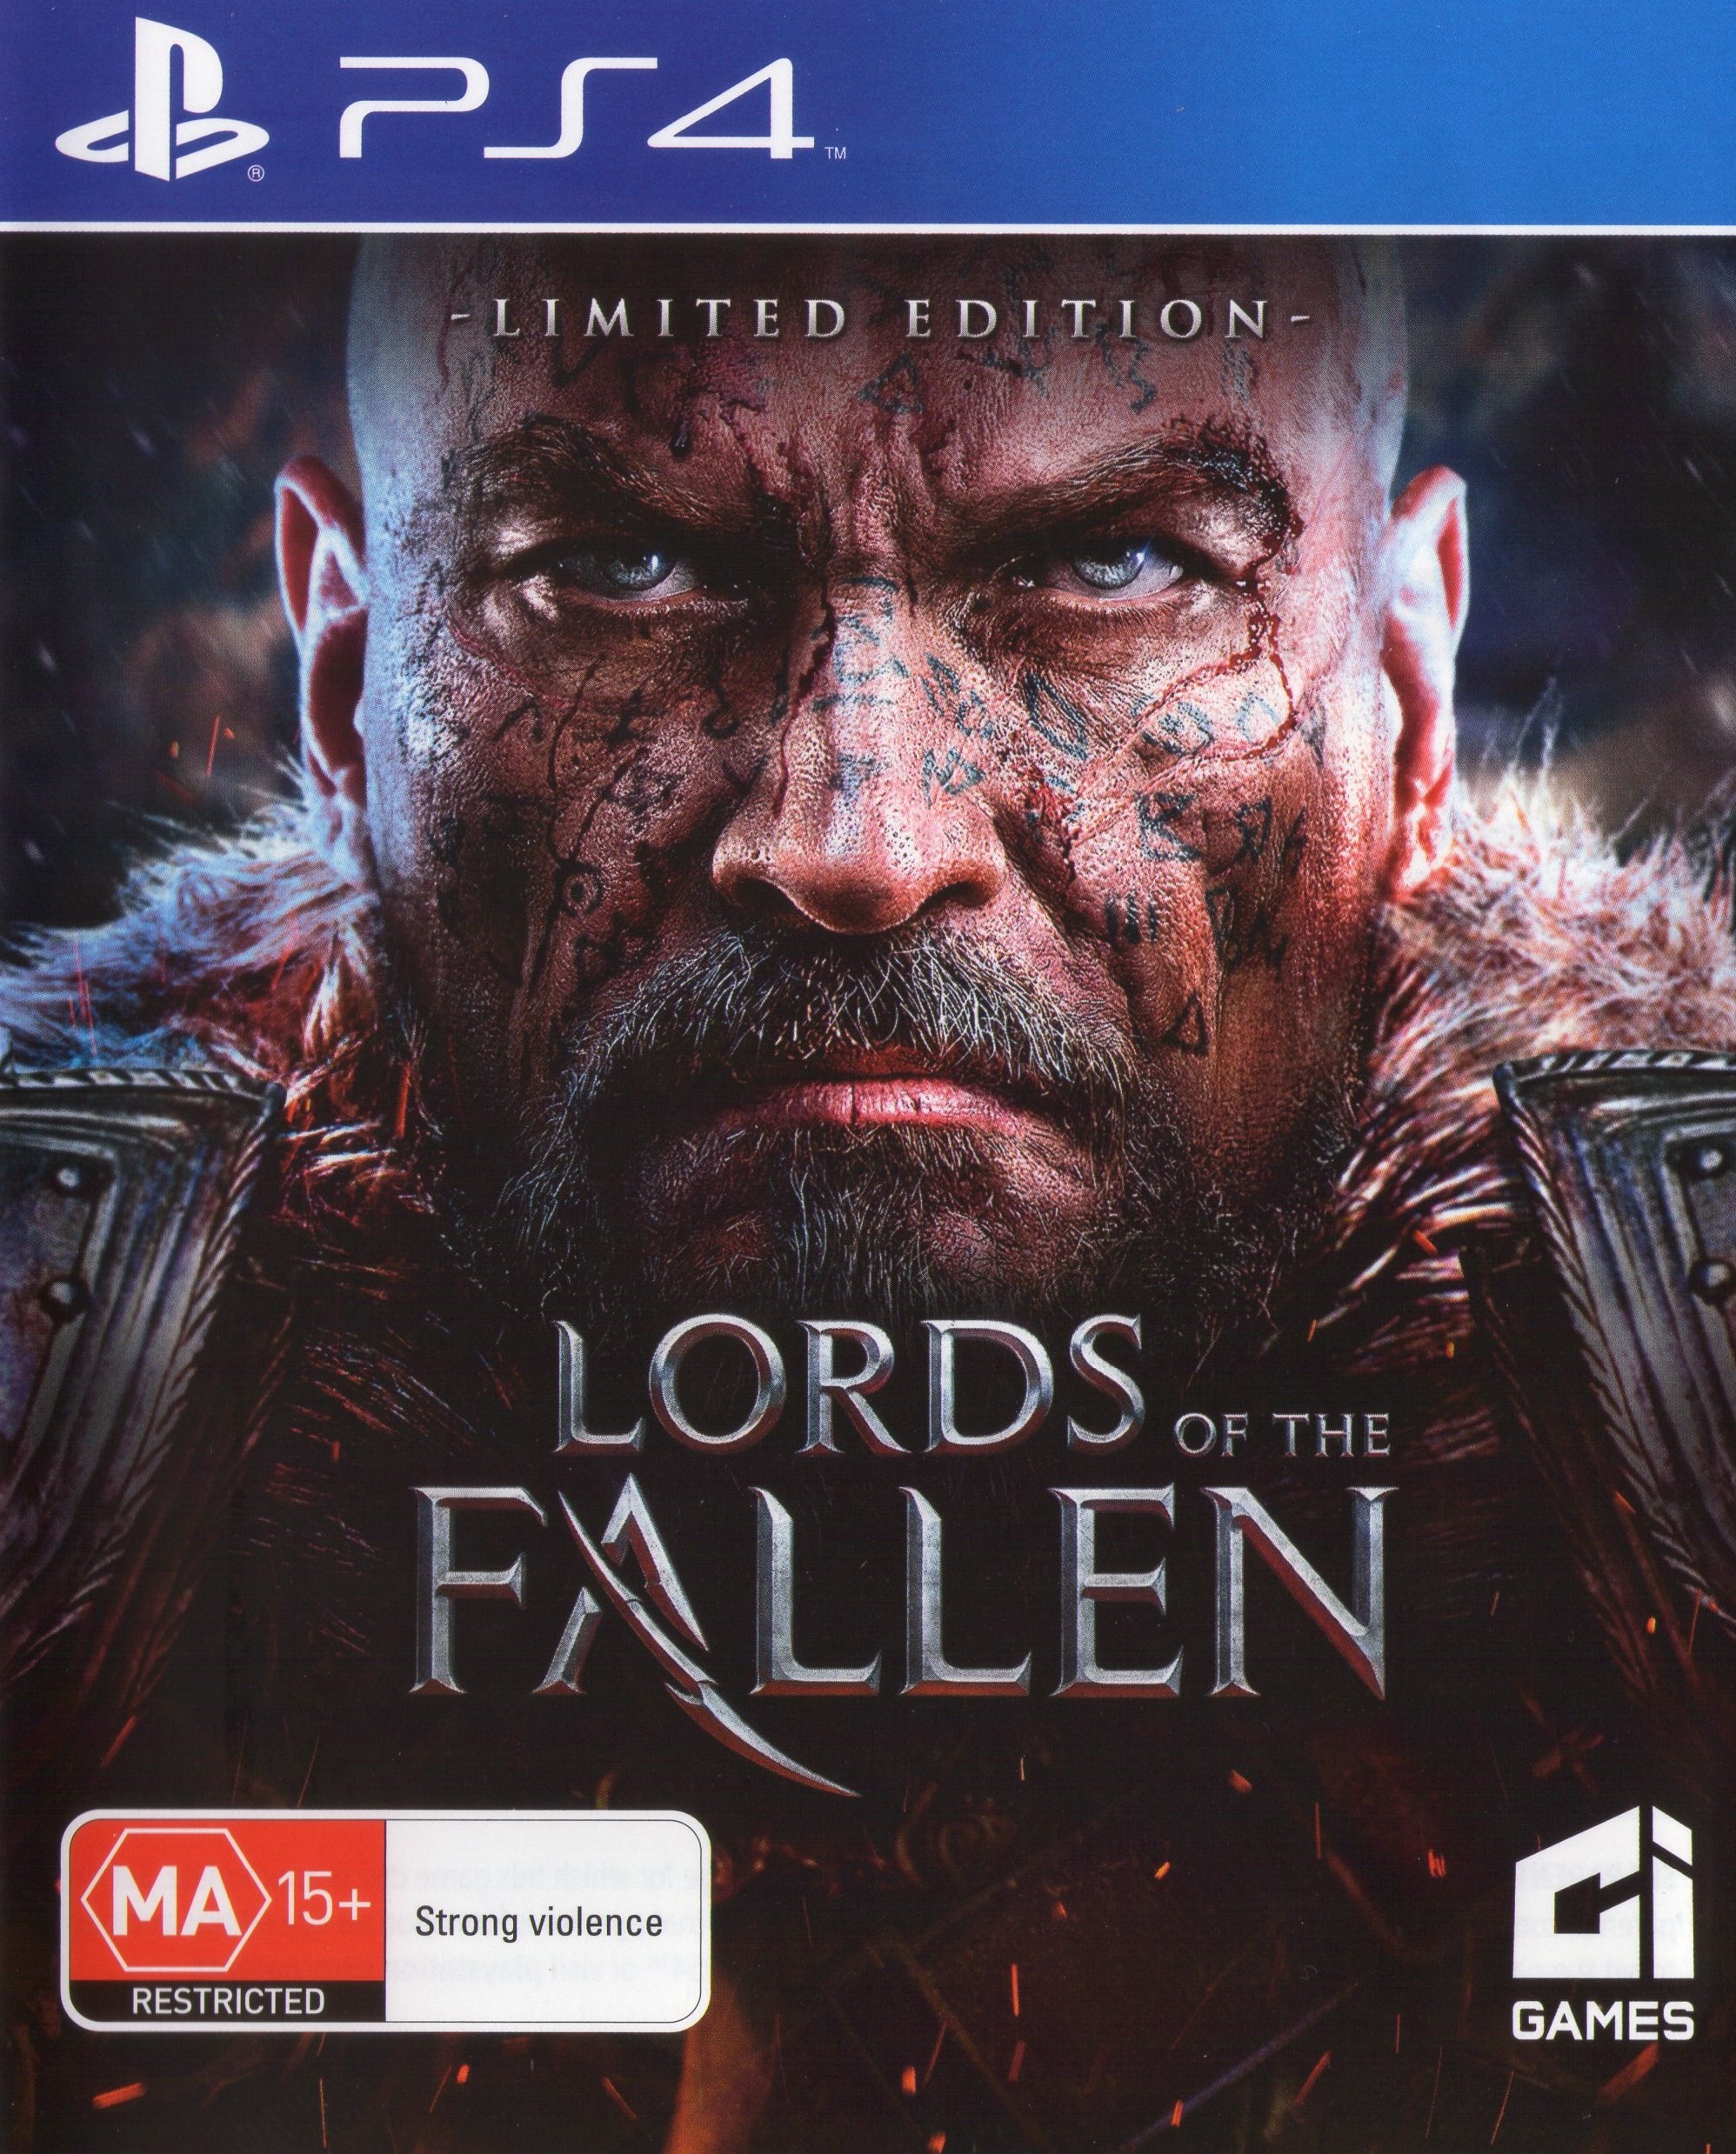 'Lords of the Fallen: Limited Edition'